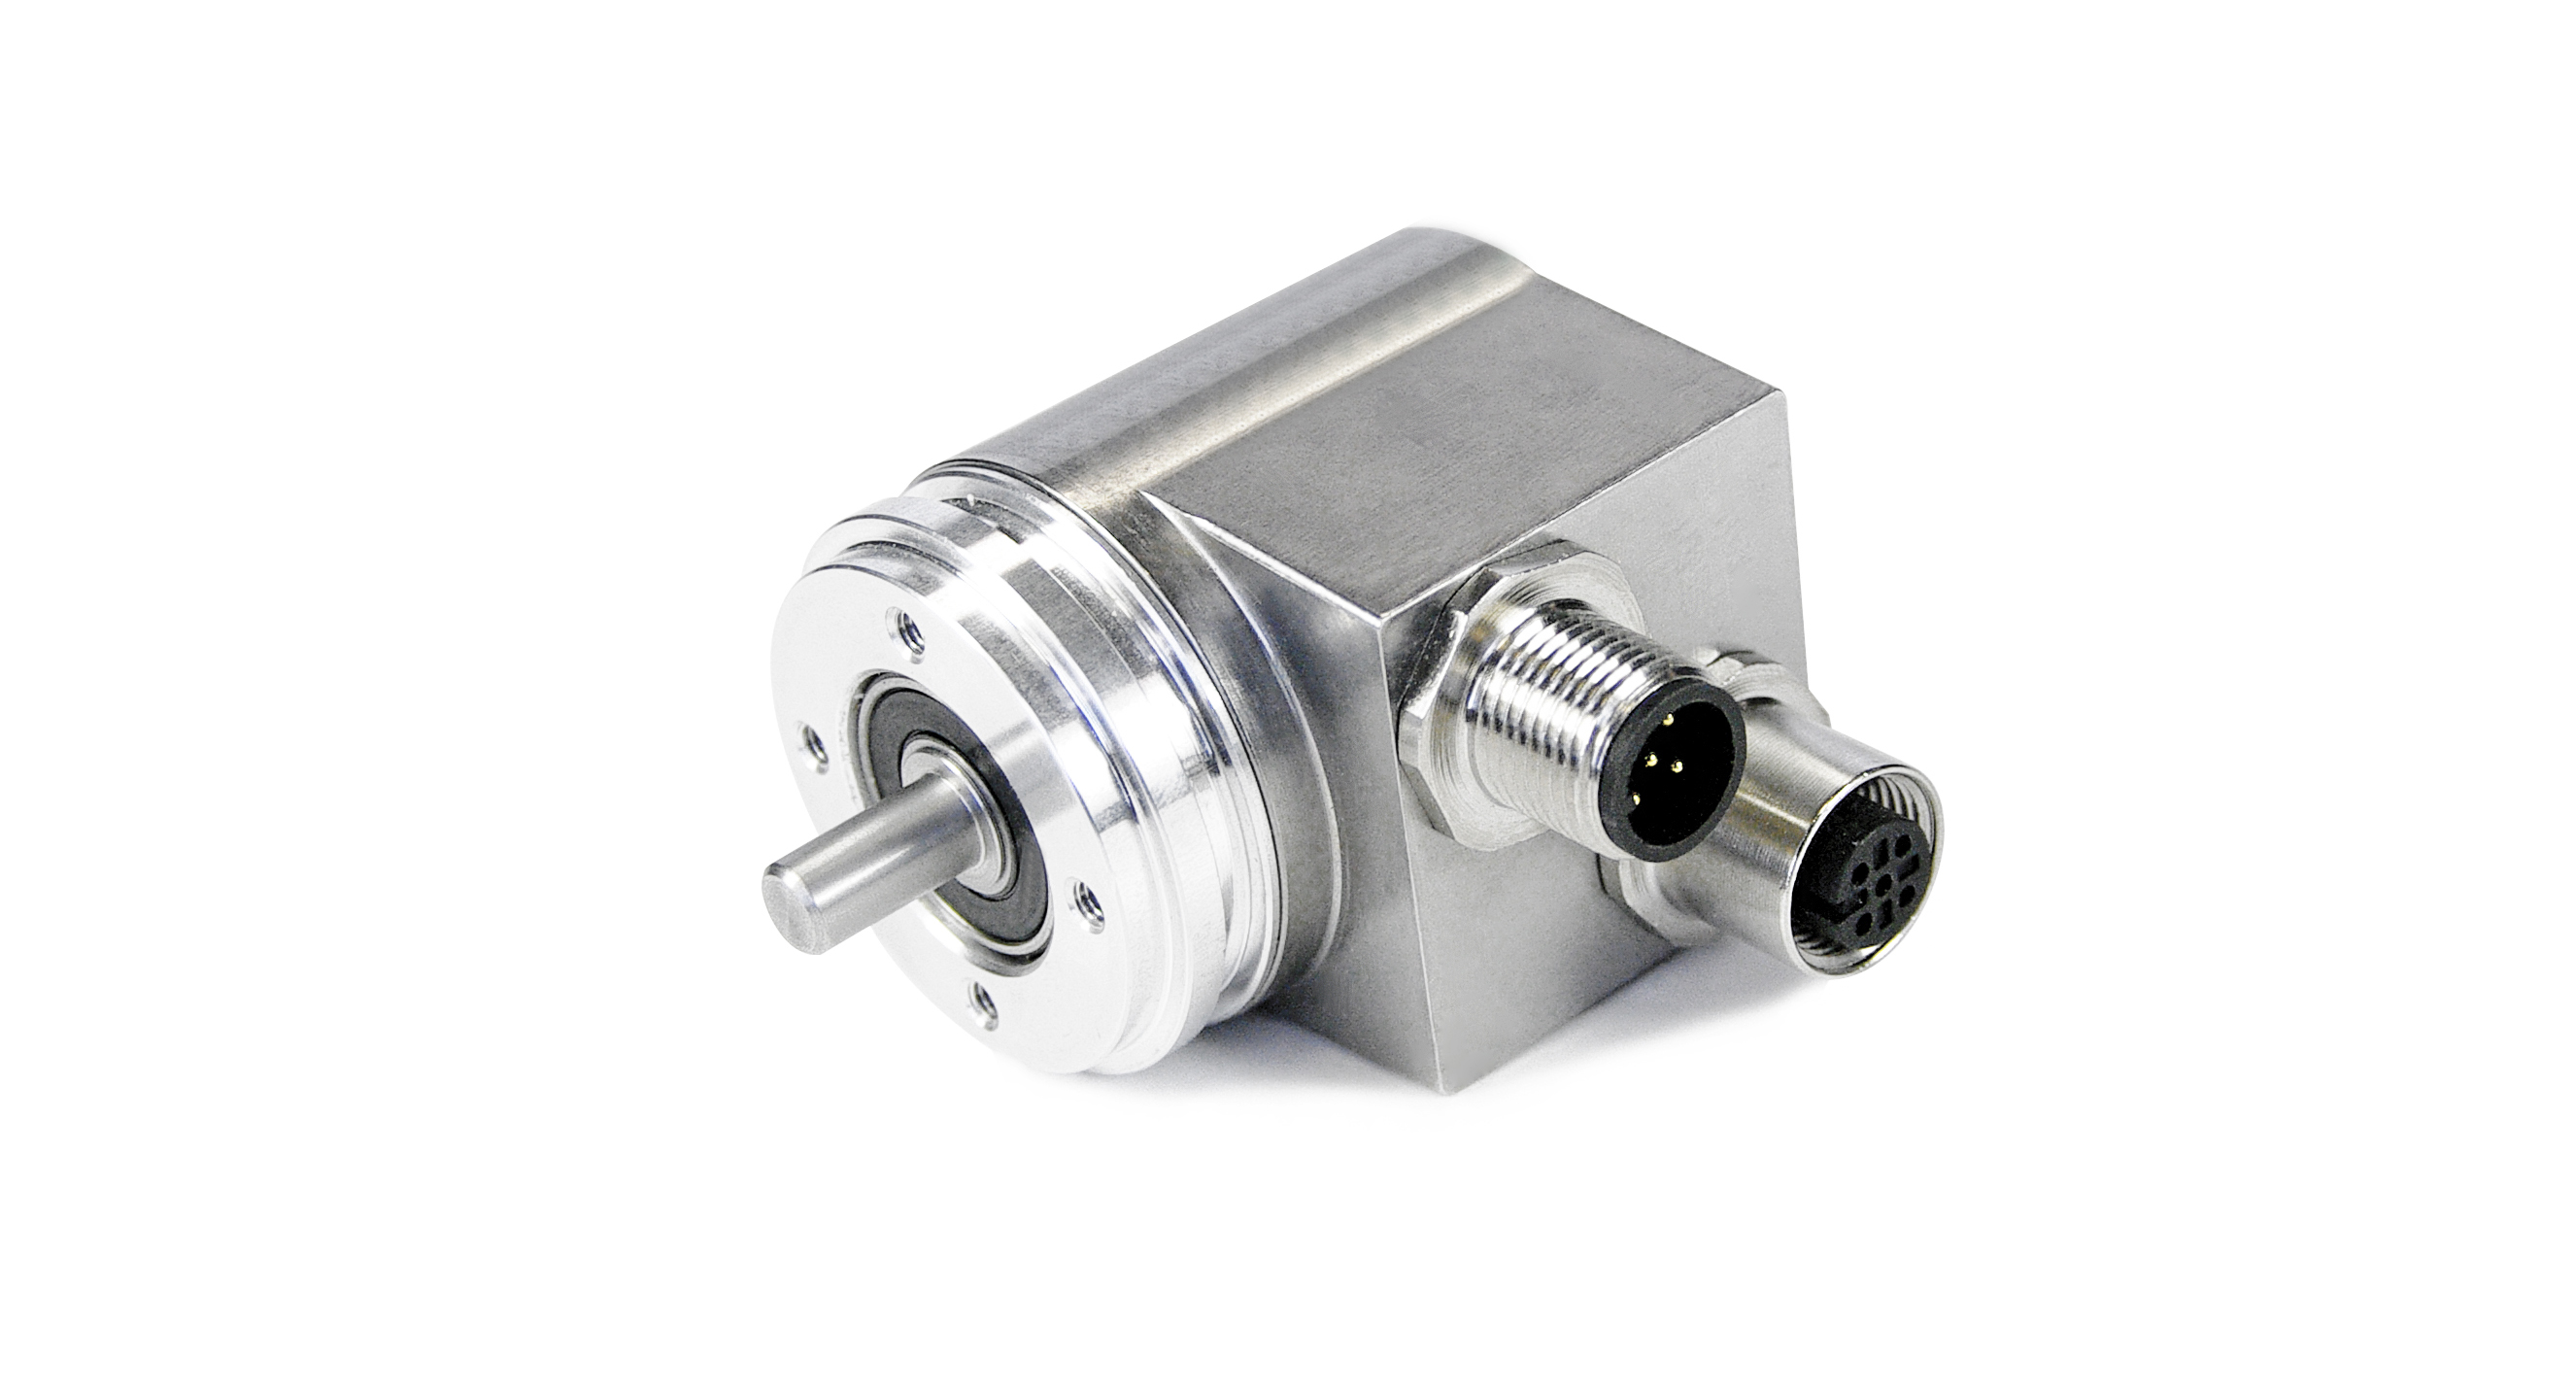 posital-precision-magnetic-encoders-now-available-with-canopen-communications-interface-canopen-ixarc